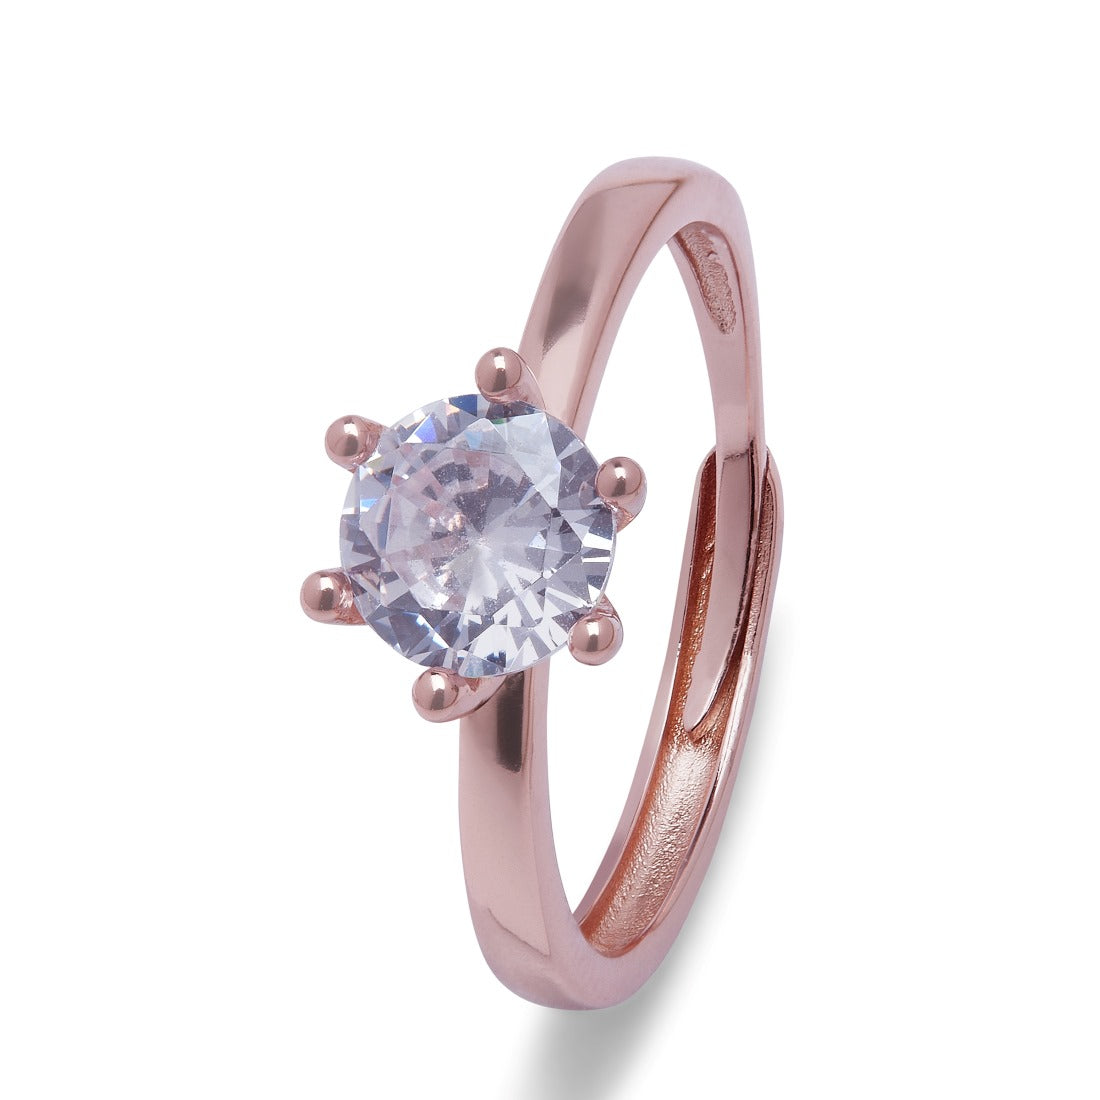 Classic Solitaire 925 Sterling Silver Ring in Rose Gold (Adjustable)